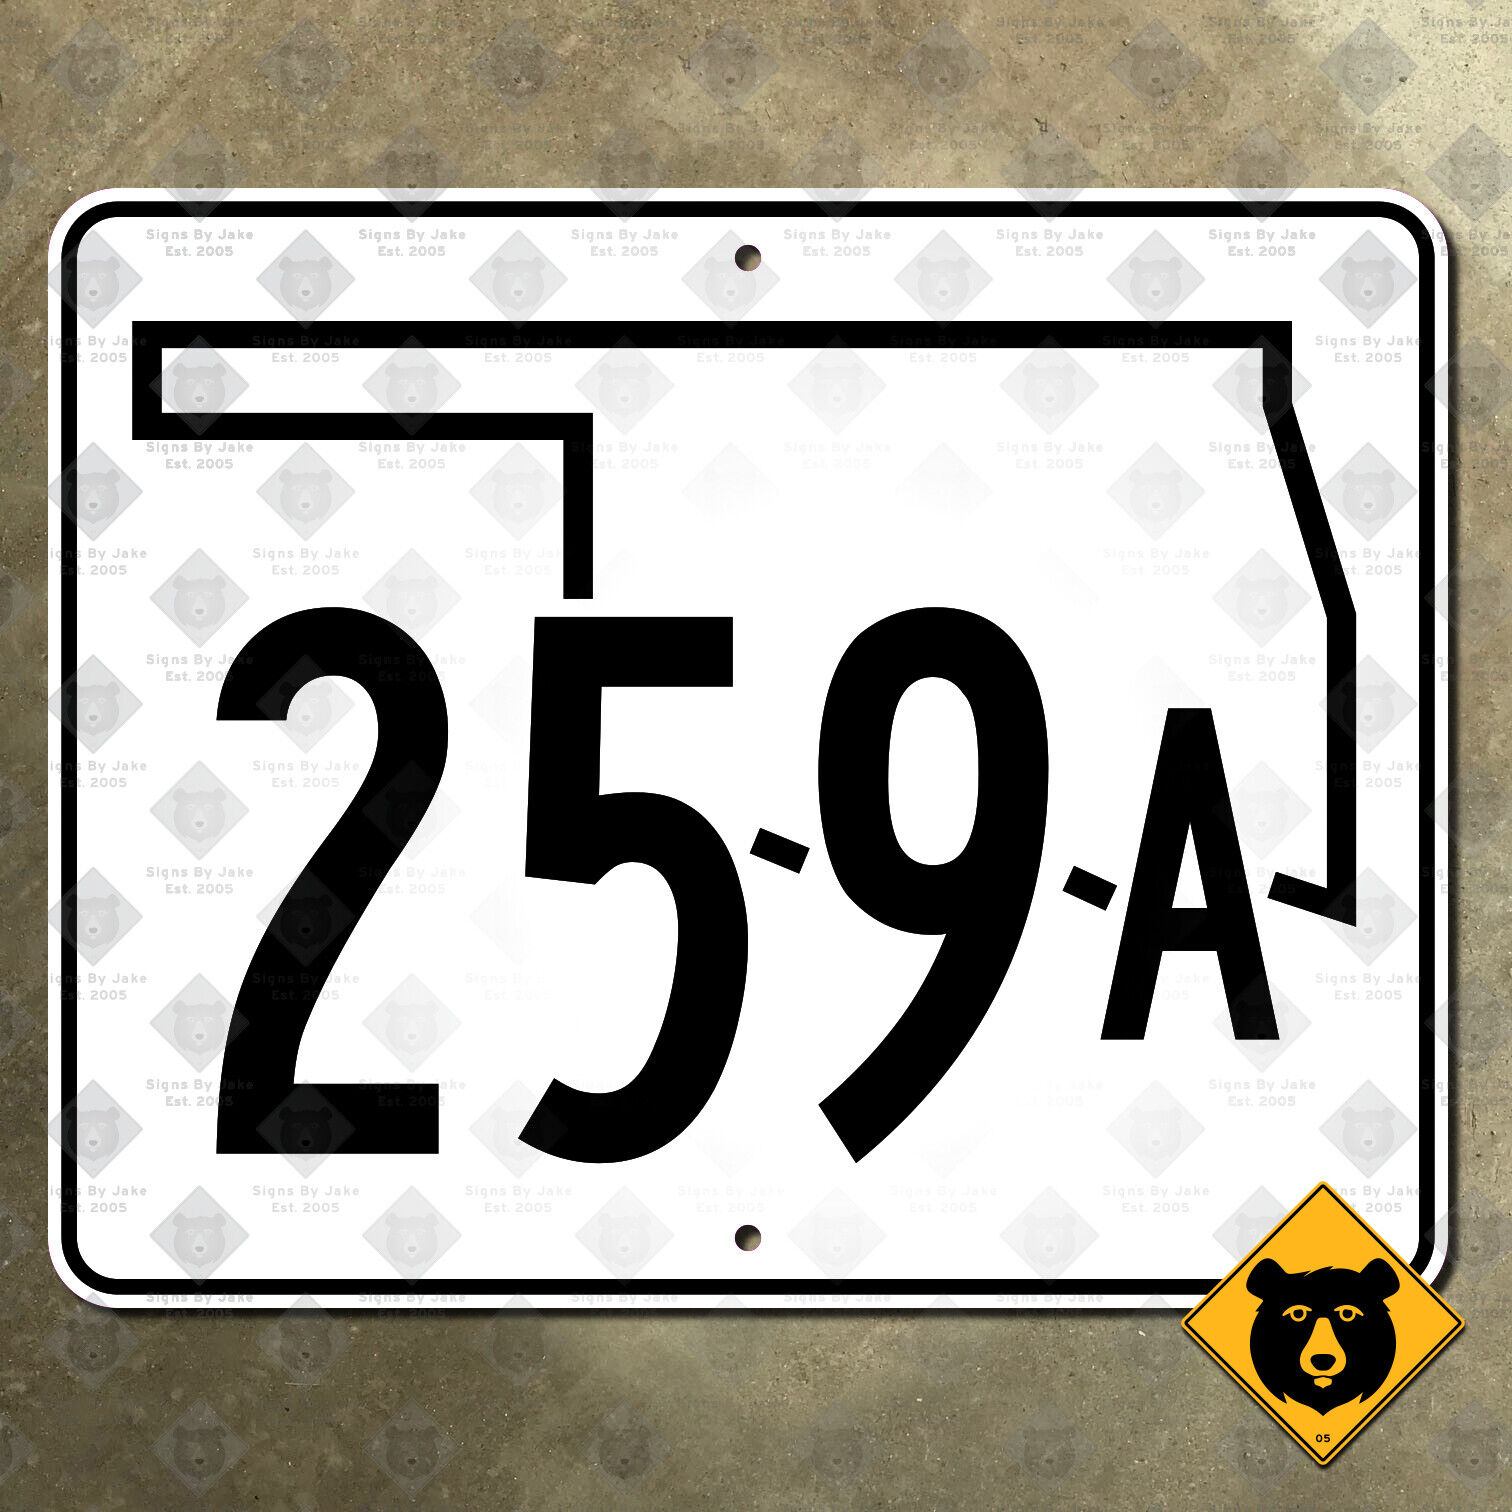 Oklahoma State Highway 259A route marker road sign Beavers Bend 2006 12x9